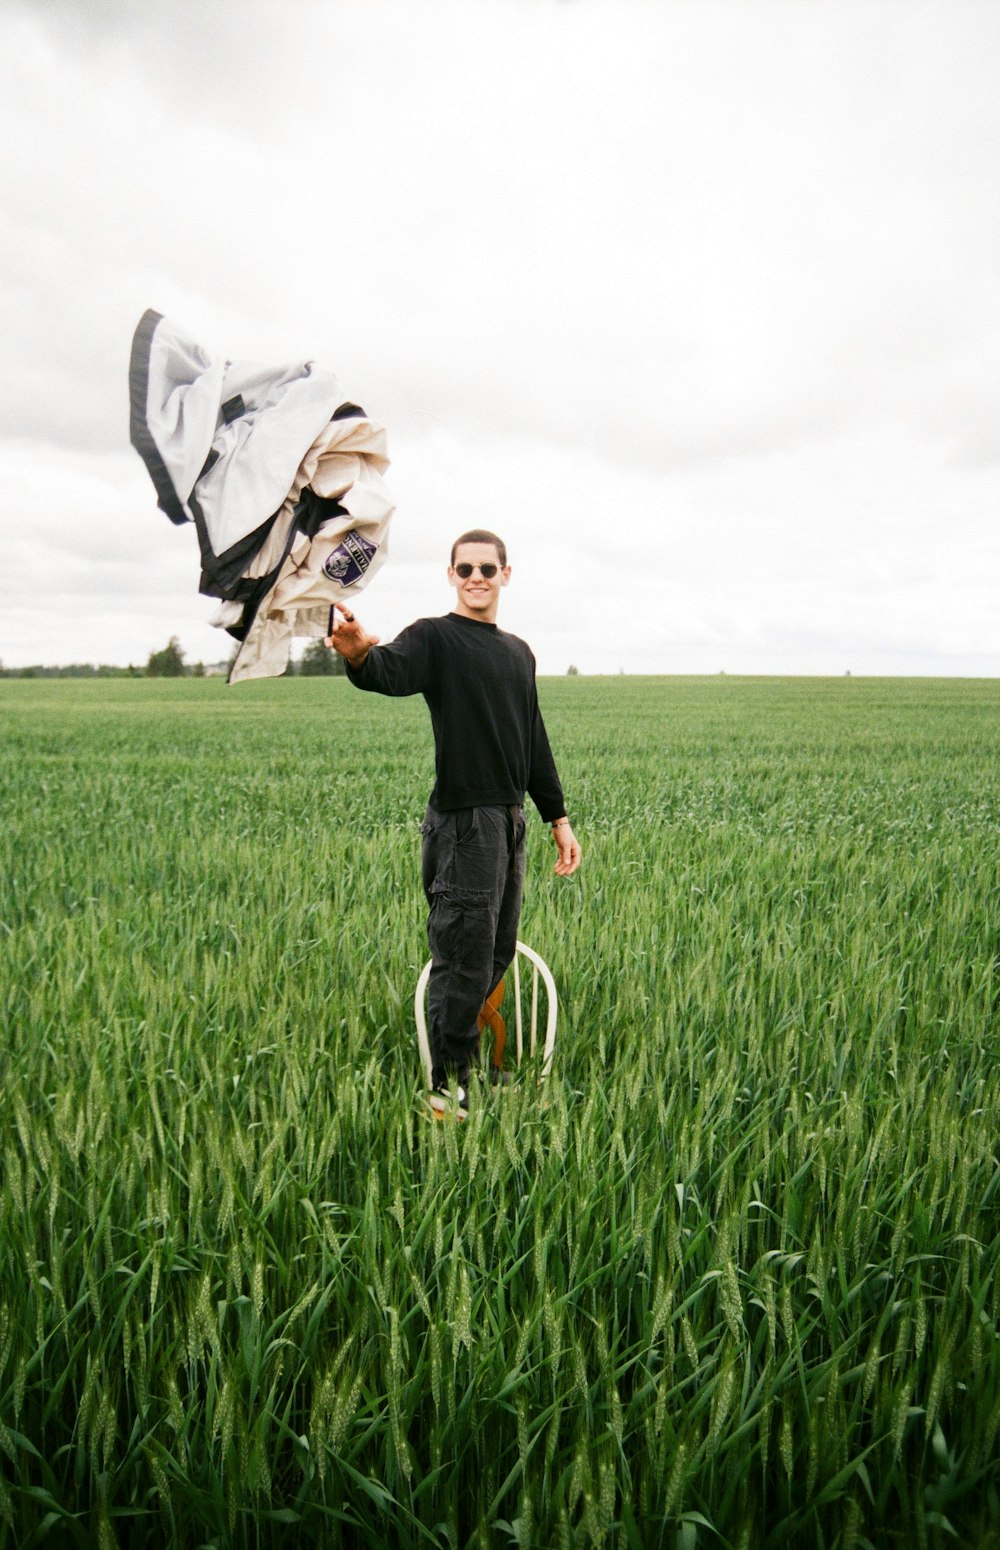 a man holding a kite in a grassy field